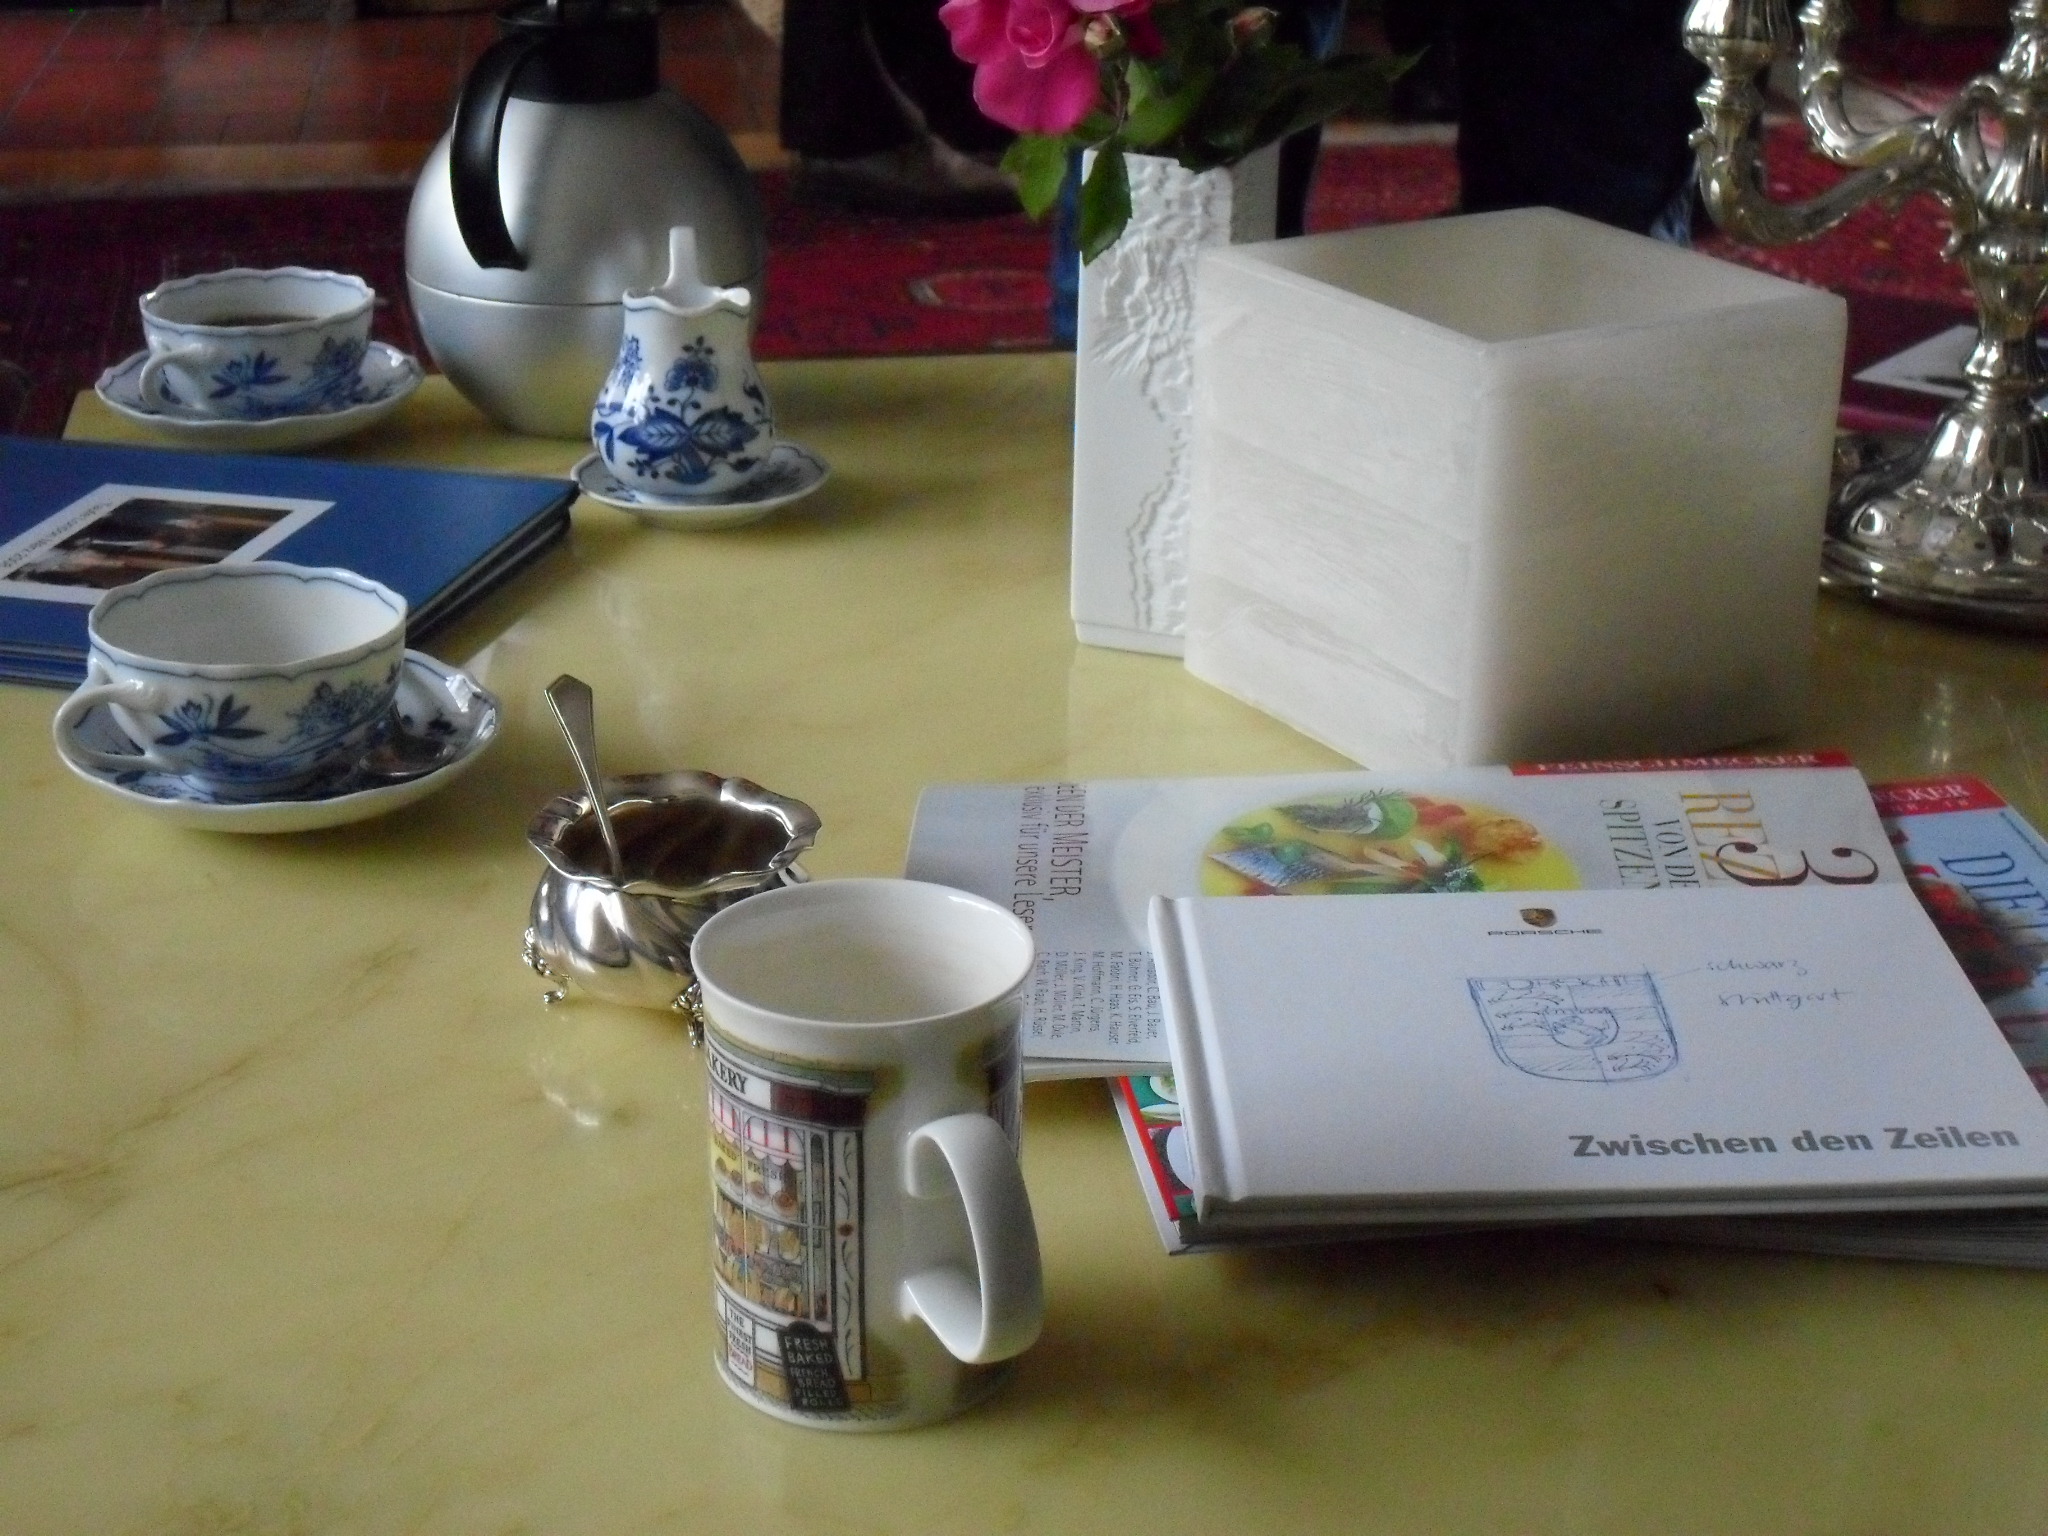 an assortment of tea cups, books and bookends on a table